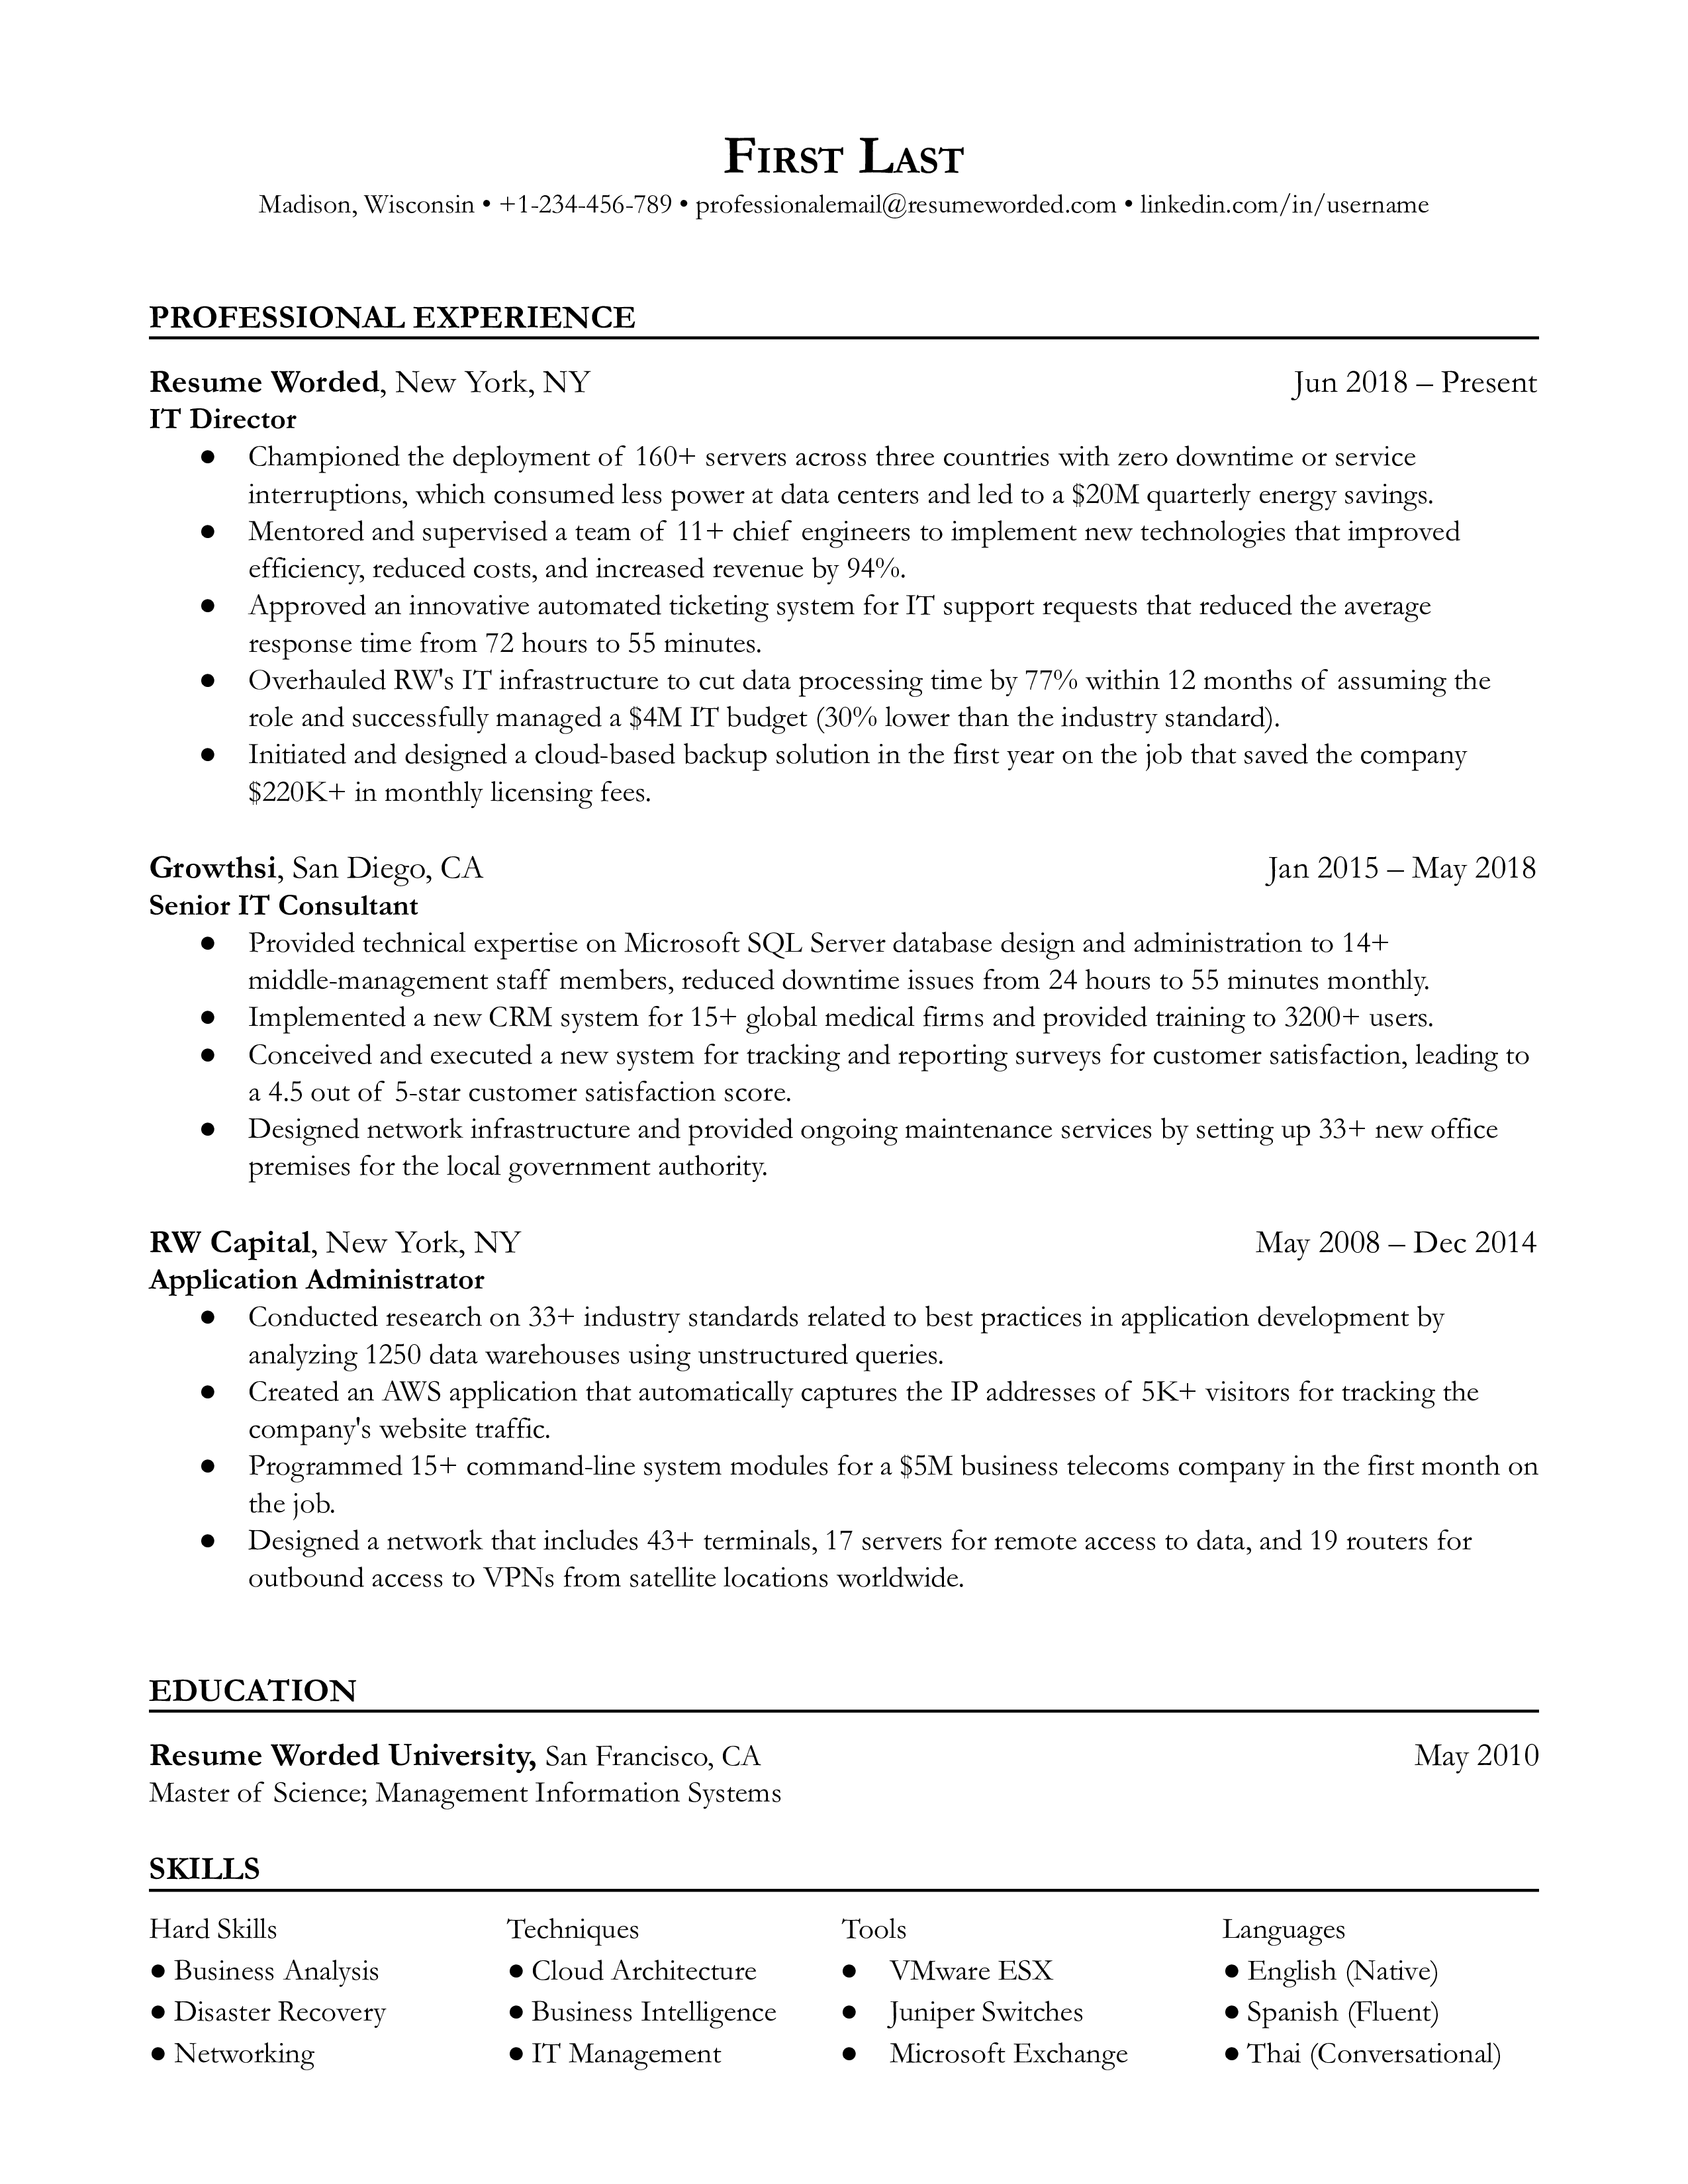 Professional CV for a forward-thinking IT Director role.